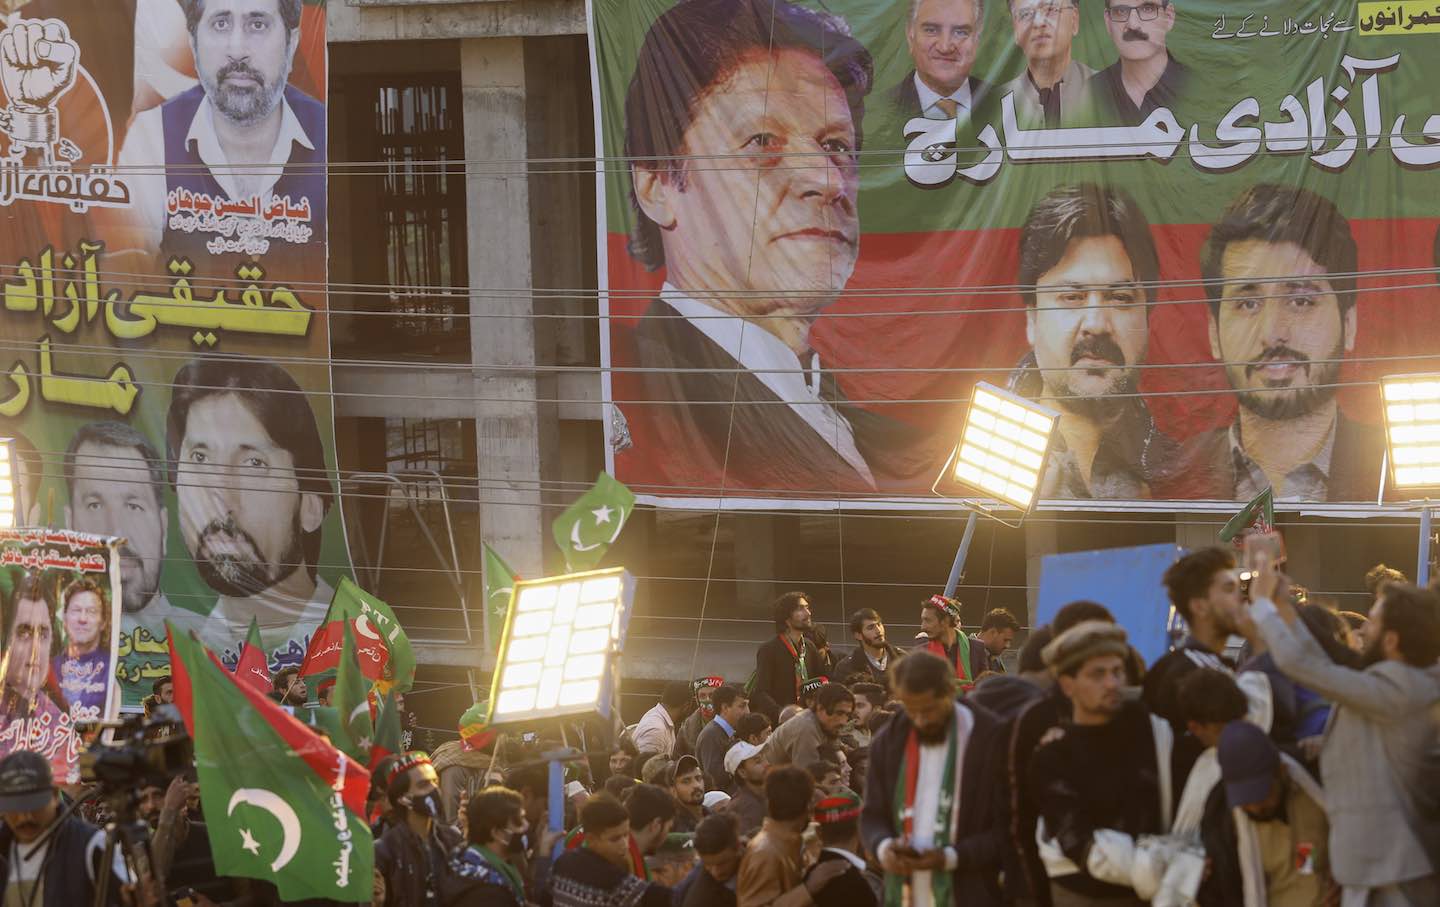 After an Attempt on Imran Khan's Life, Pakistan Is in Crisis